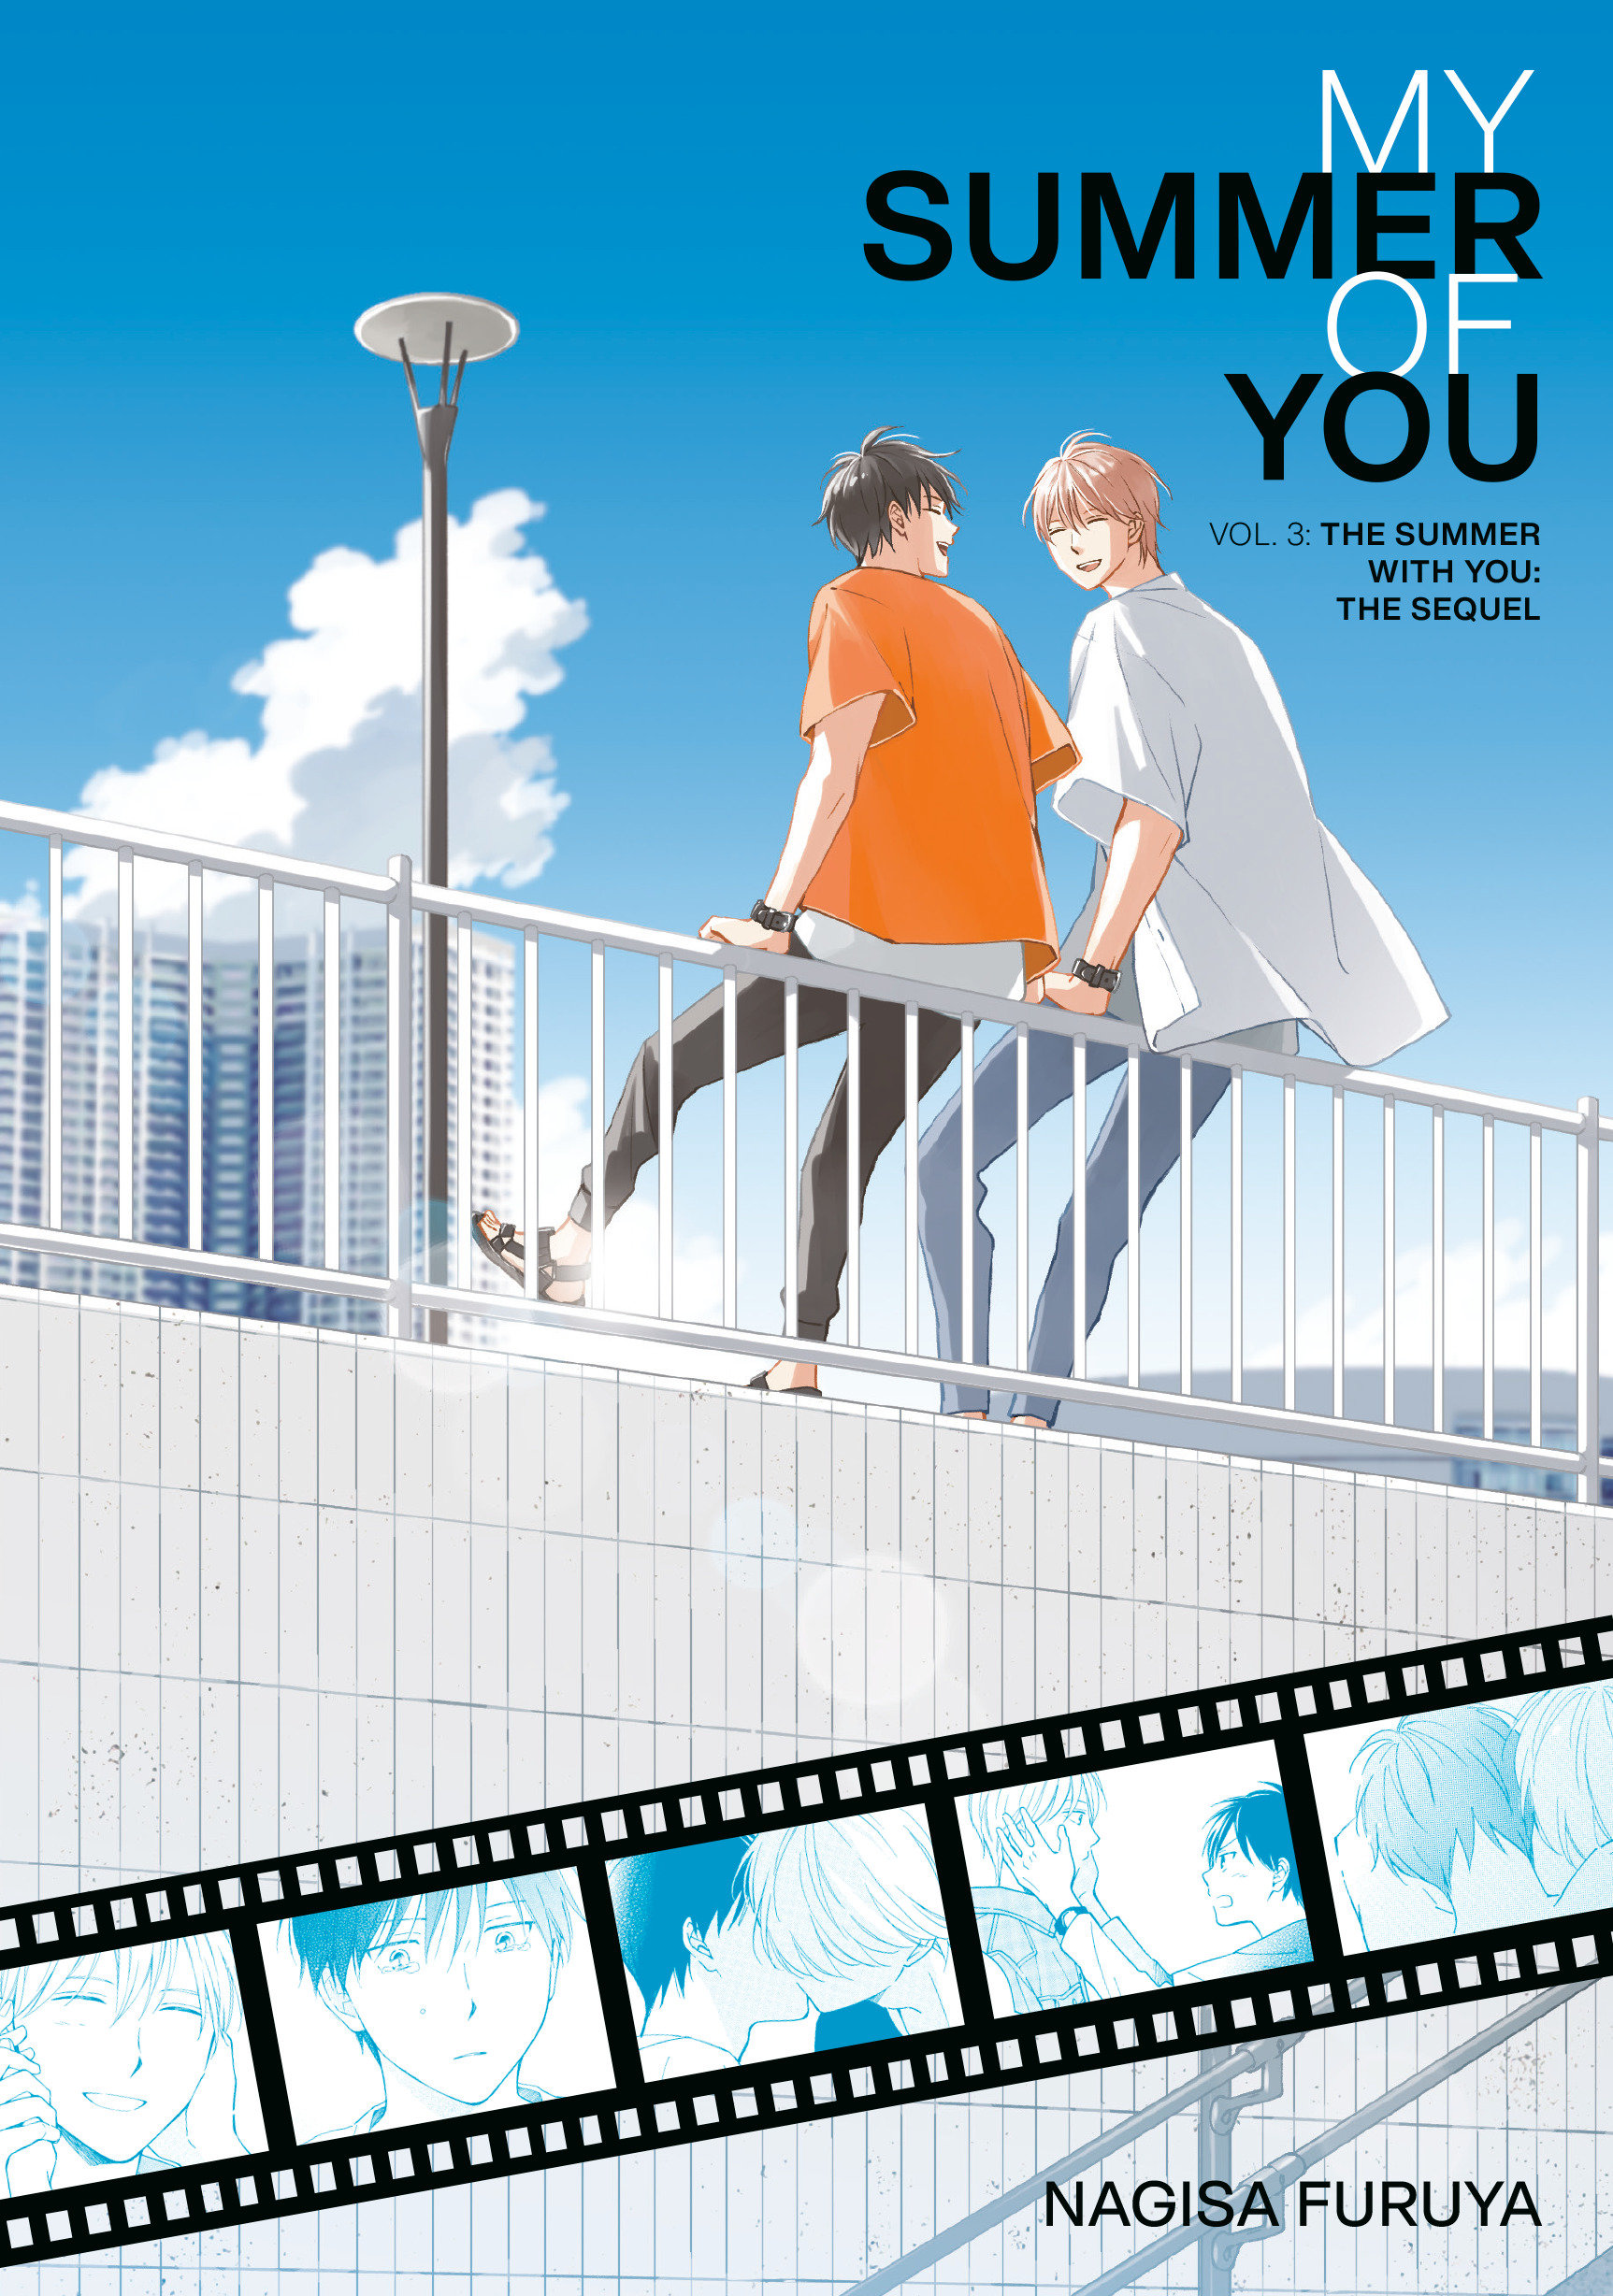 The Summer With You: The Sequel (My Summer of You Volume 3)